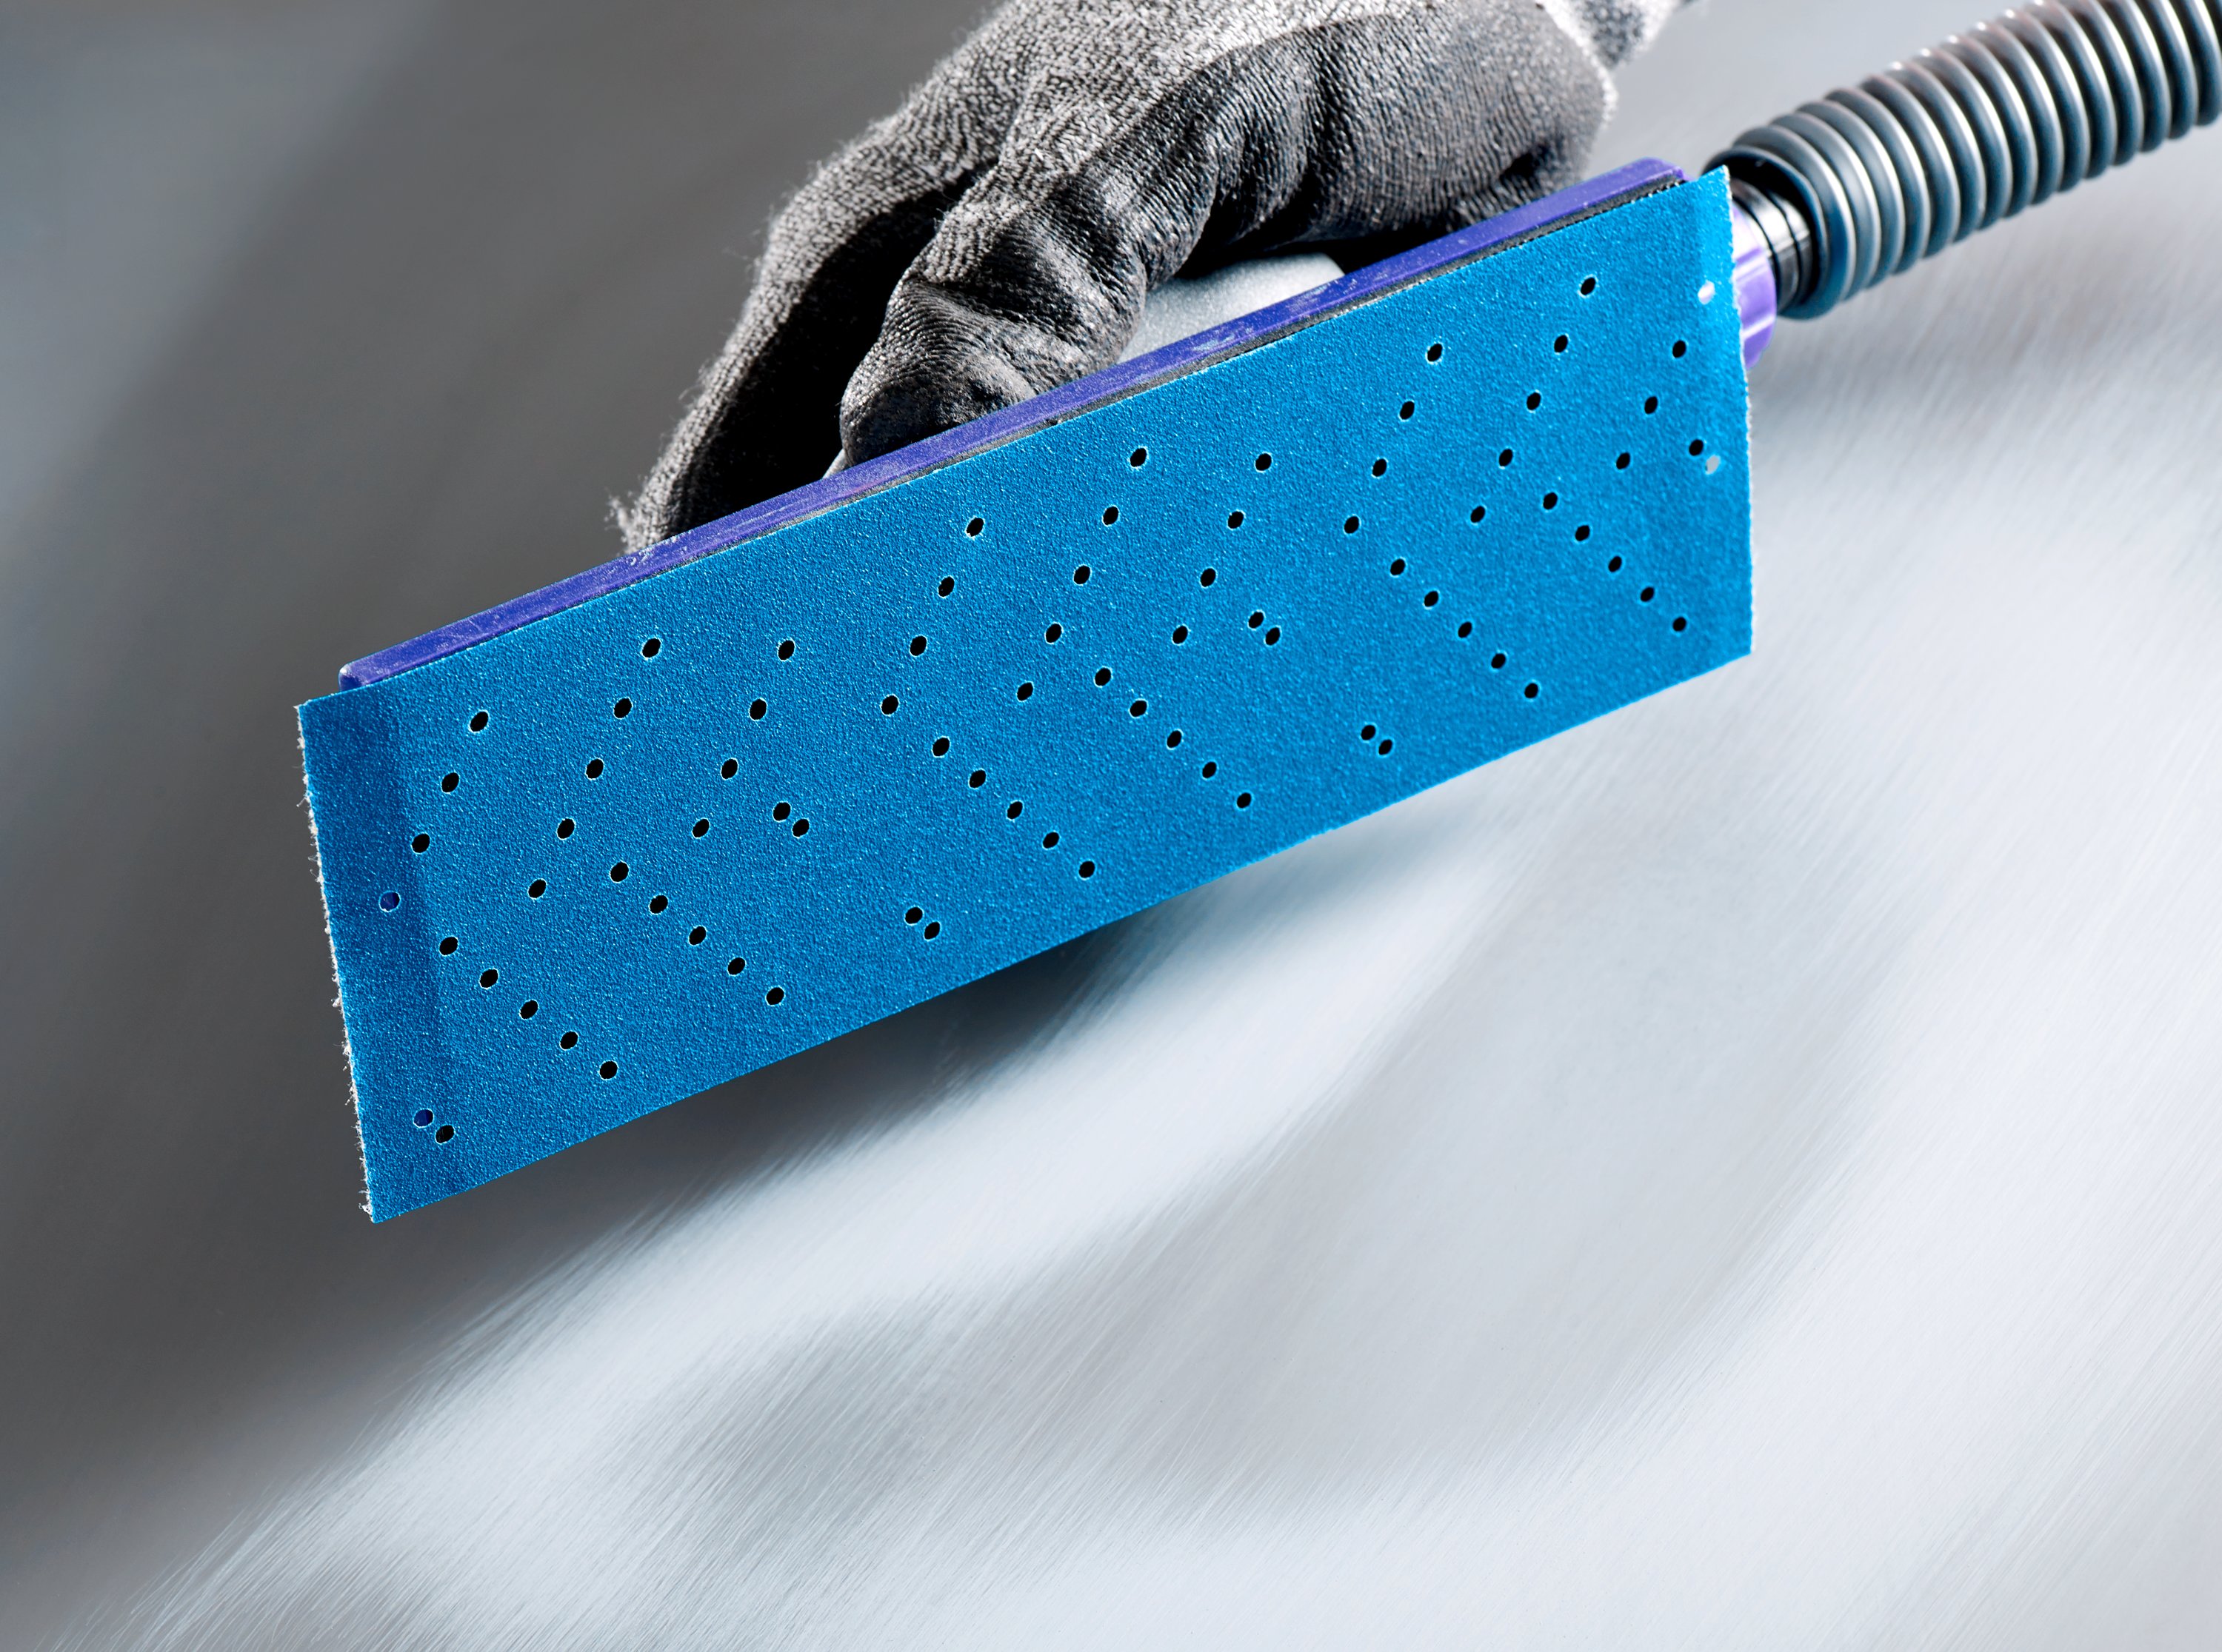 3M™ Blue Abrasives, the 3M™ Hookit™ Blue Abrasive Sheet Rolls is engineered for best-in-class cut, life and efficiency across your entire shop.